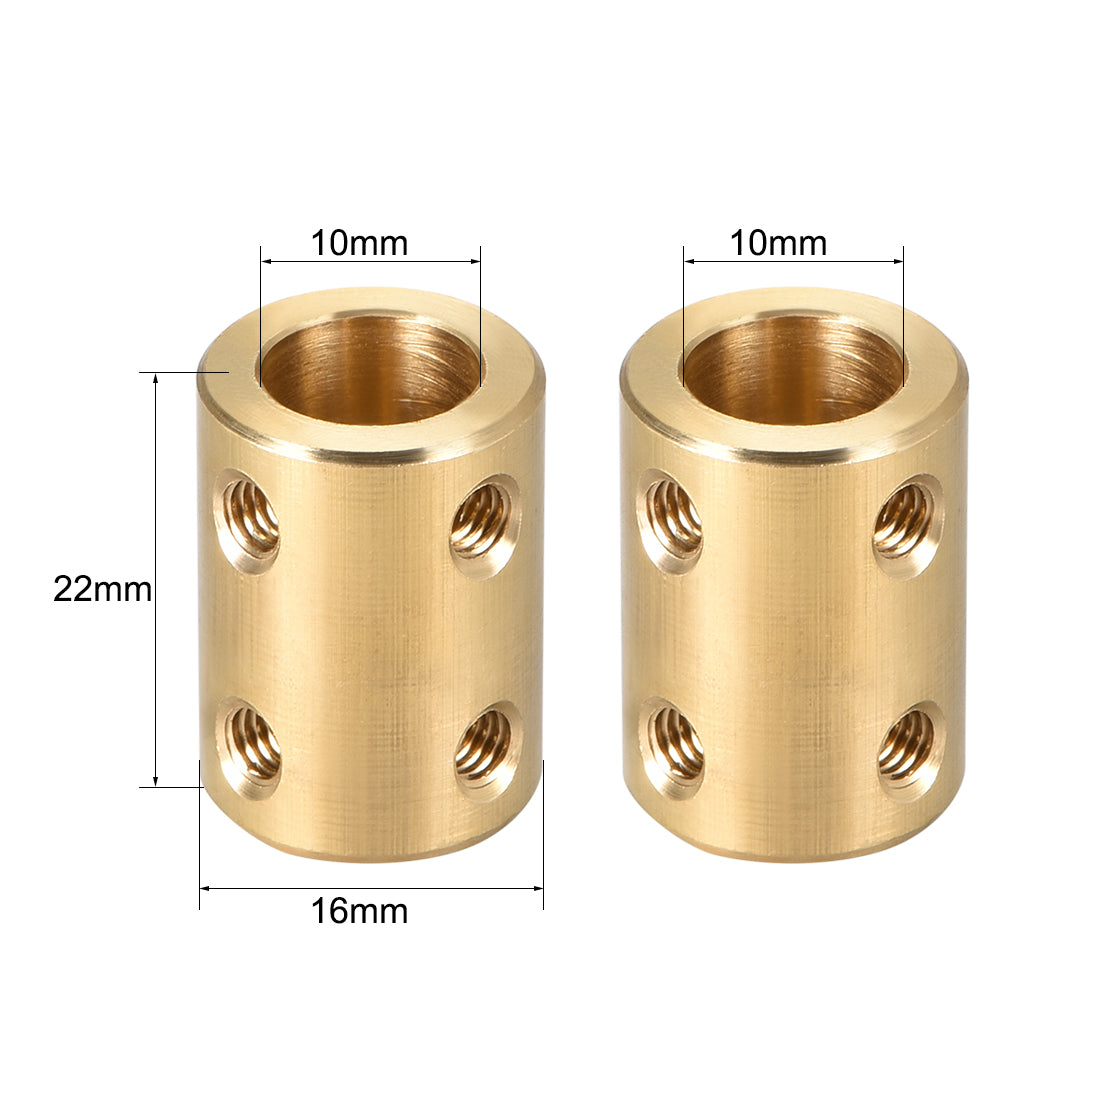 uxcell Uxcell Shaft Coupling 10mm to 10mm Bore L22xD16 Robot Motor Wheel Rigid Coupler Connector Gold Tone